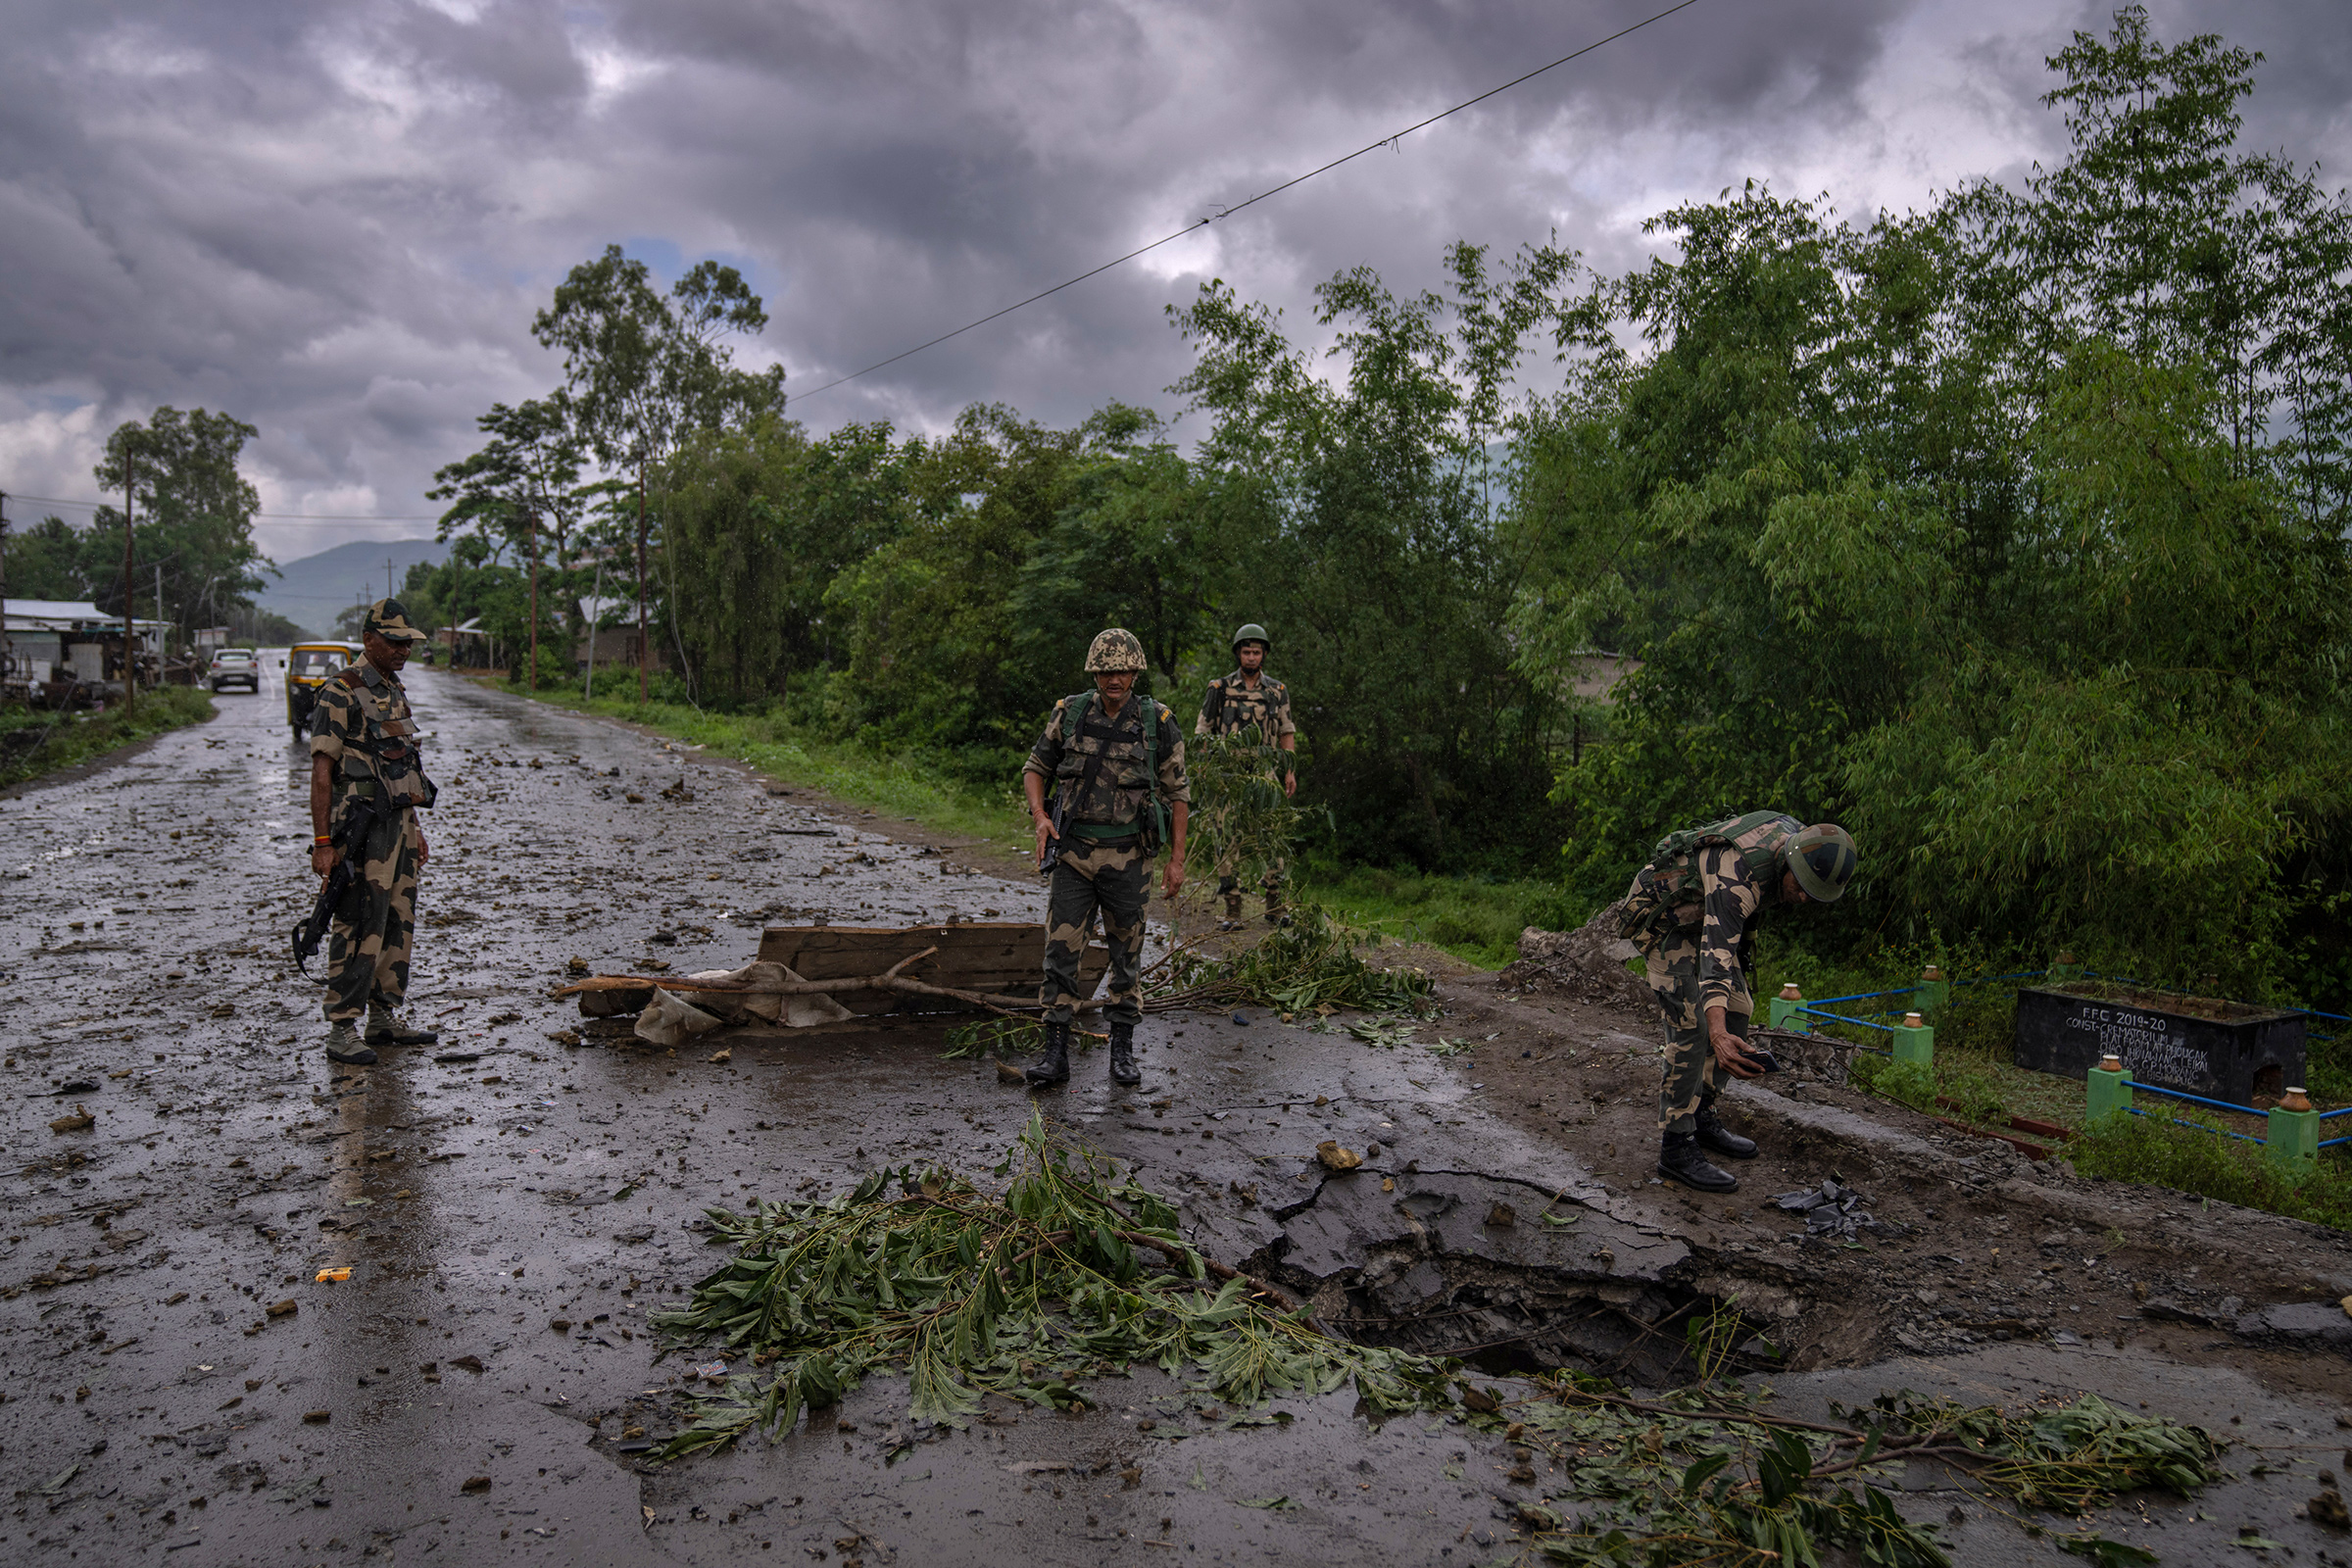 Indian paramilitary soldiers inspect the site of a car bomb explosion in Kwakta, some 50 kilometers from Imphal, capital of the northeastern Indian state of Manipur on June 22. Manipur is caught in a deadly conflict between two ethnic communities that have armed themselves and launched brutal attacks against one another. The clashes, which have left at least 120 dead by the authorities' conservative estimates, persist despite the army’s presence. (Altaf Qadri—AP)